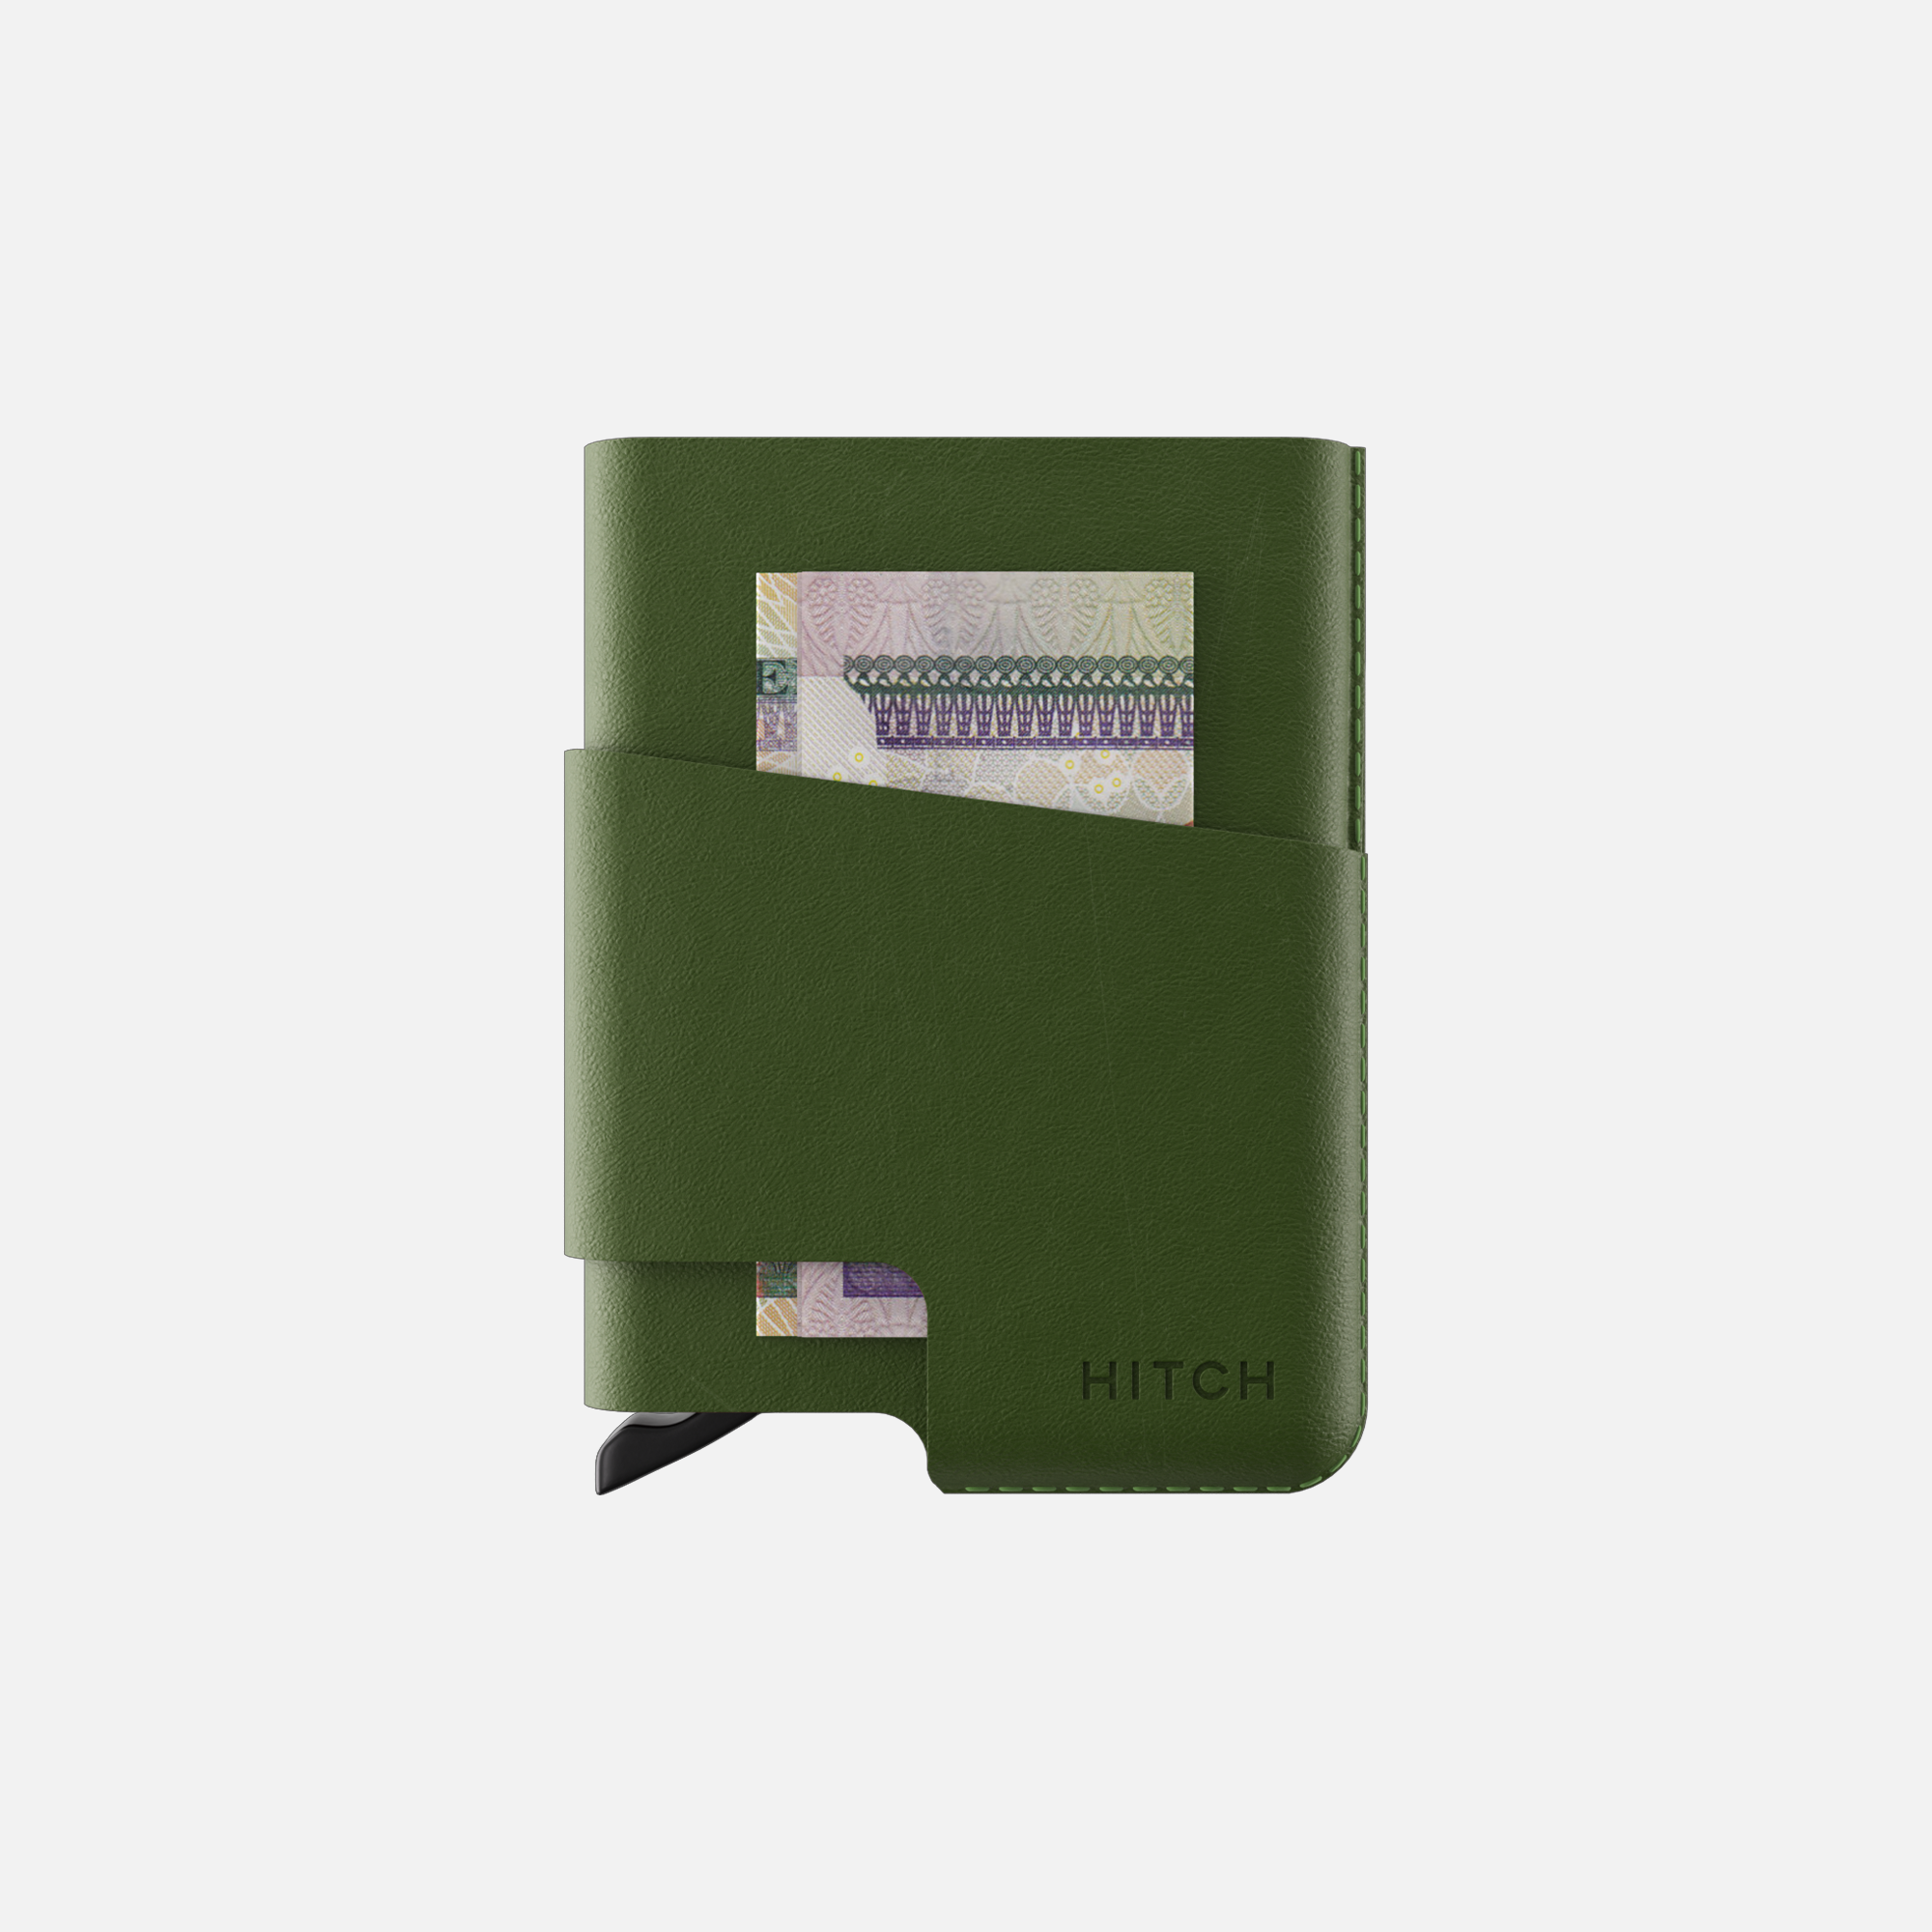 Green leather cardholder wallet with elastic closure and currency note visible in pocket, isolated on white background.